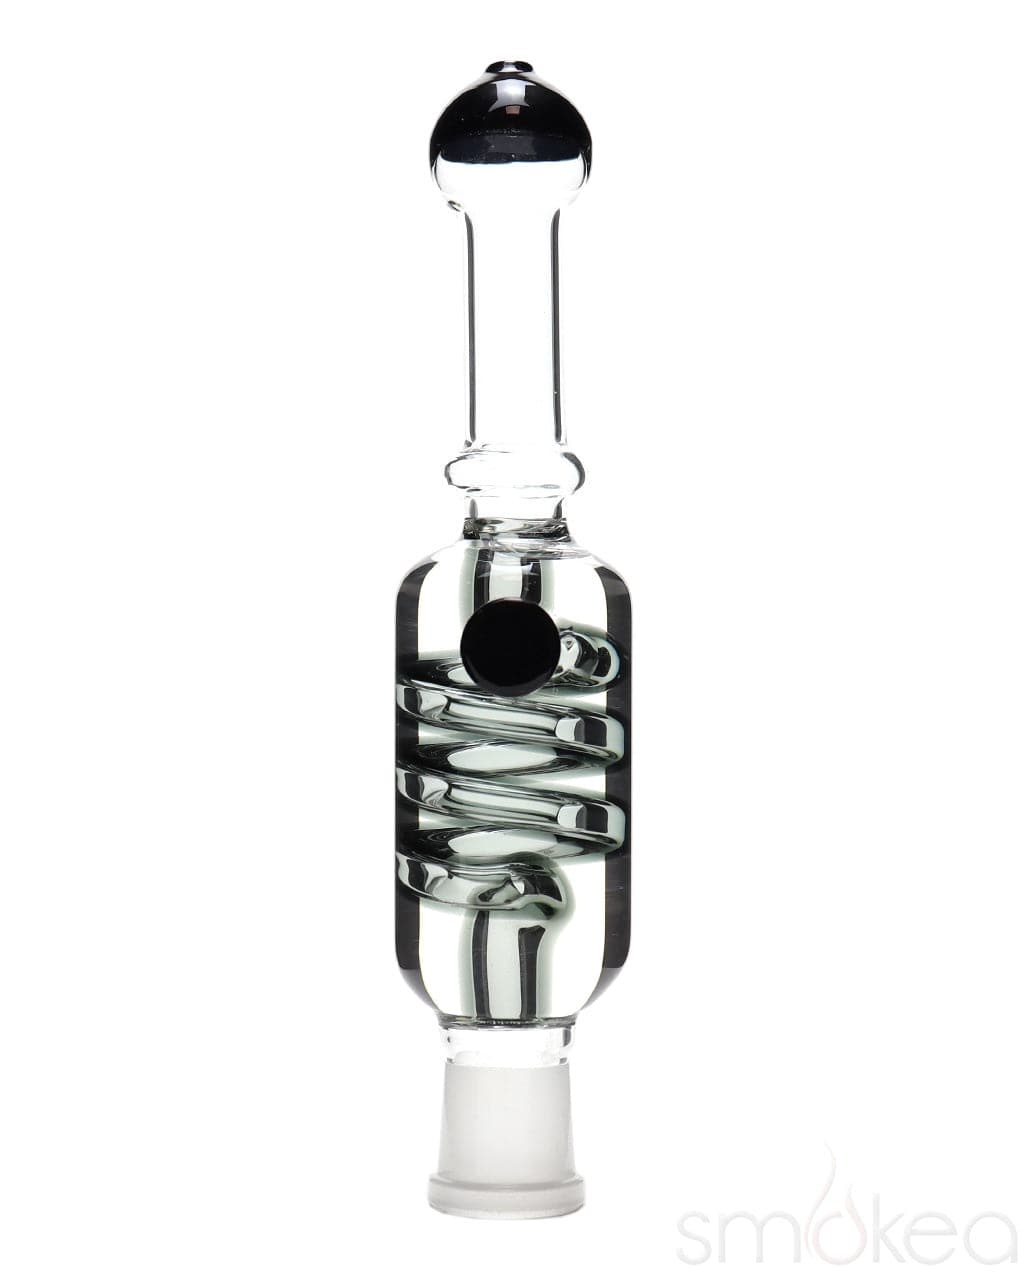 Freeze Pipe Bubbler Replacement Spiral Glycerin Coil